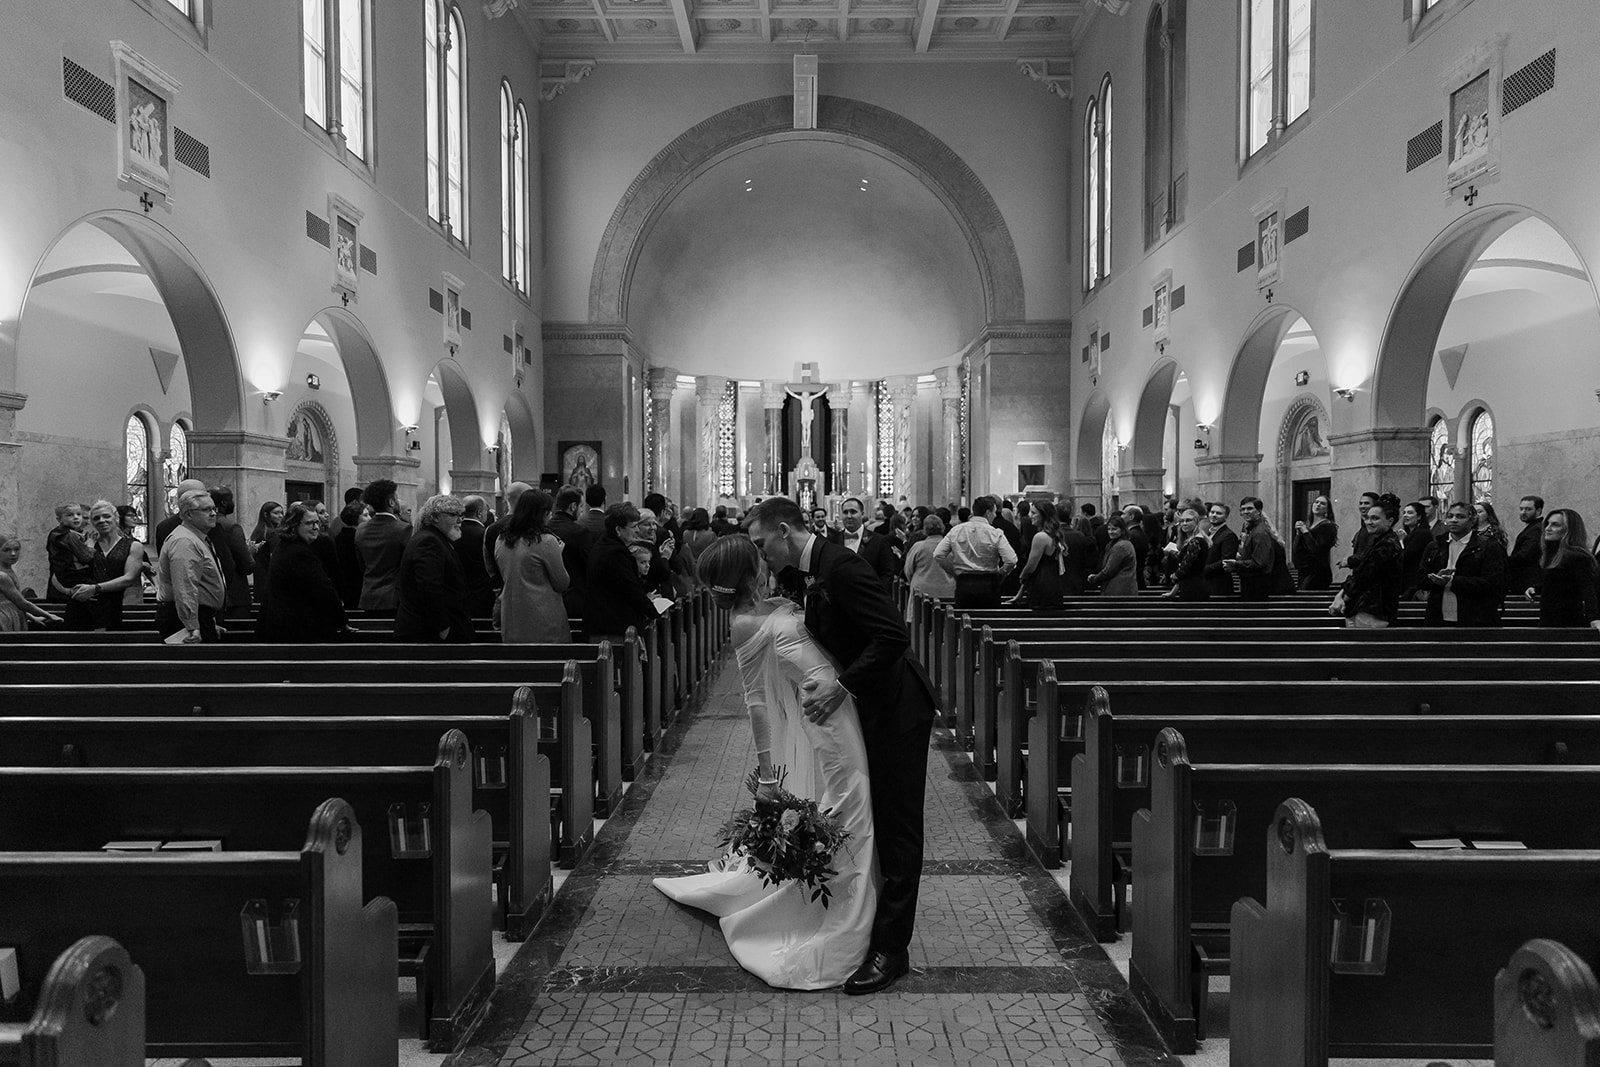 Bride and groom first kiss in a church